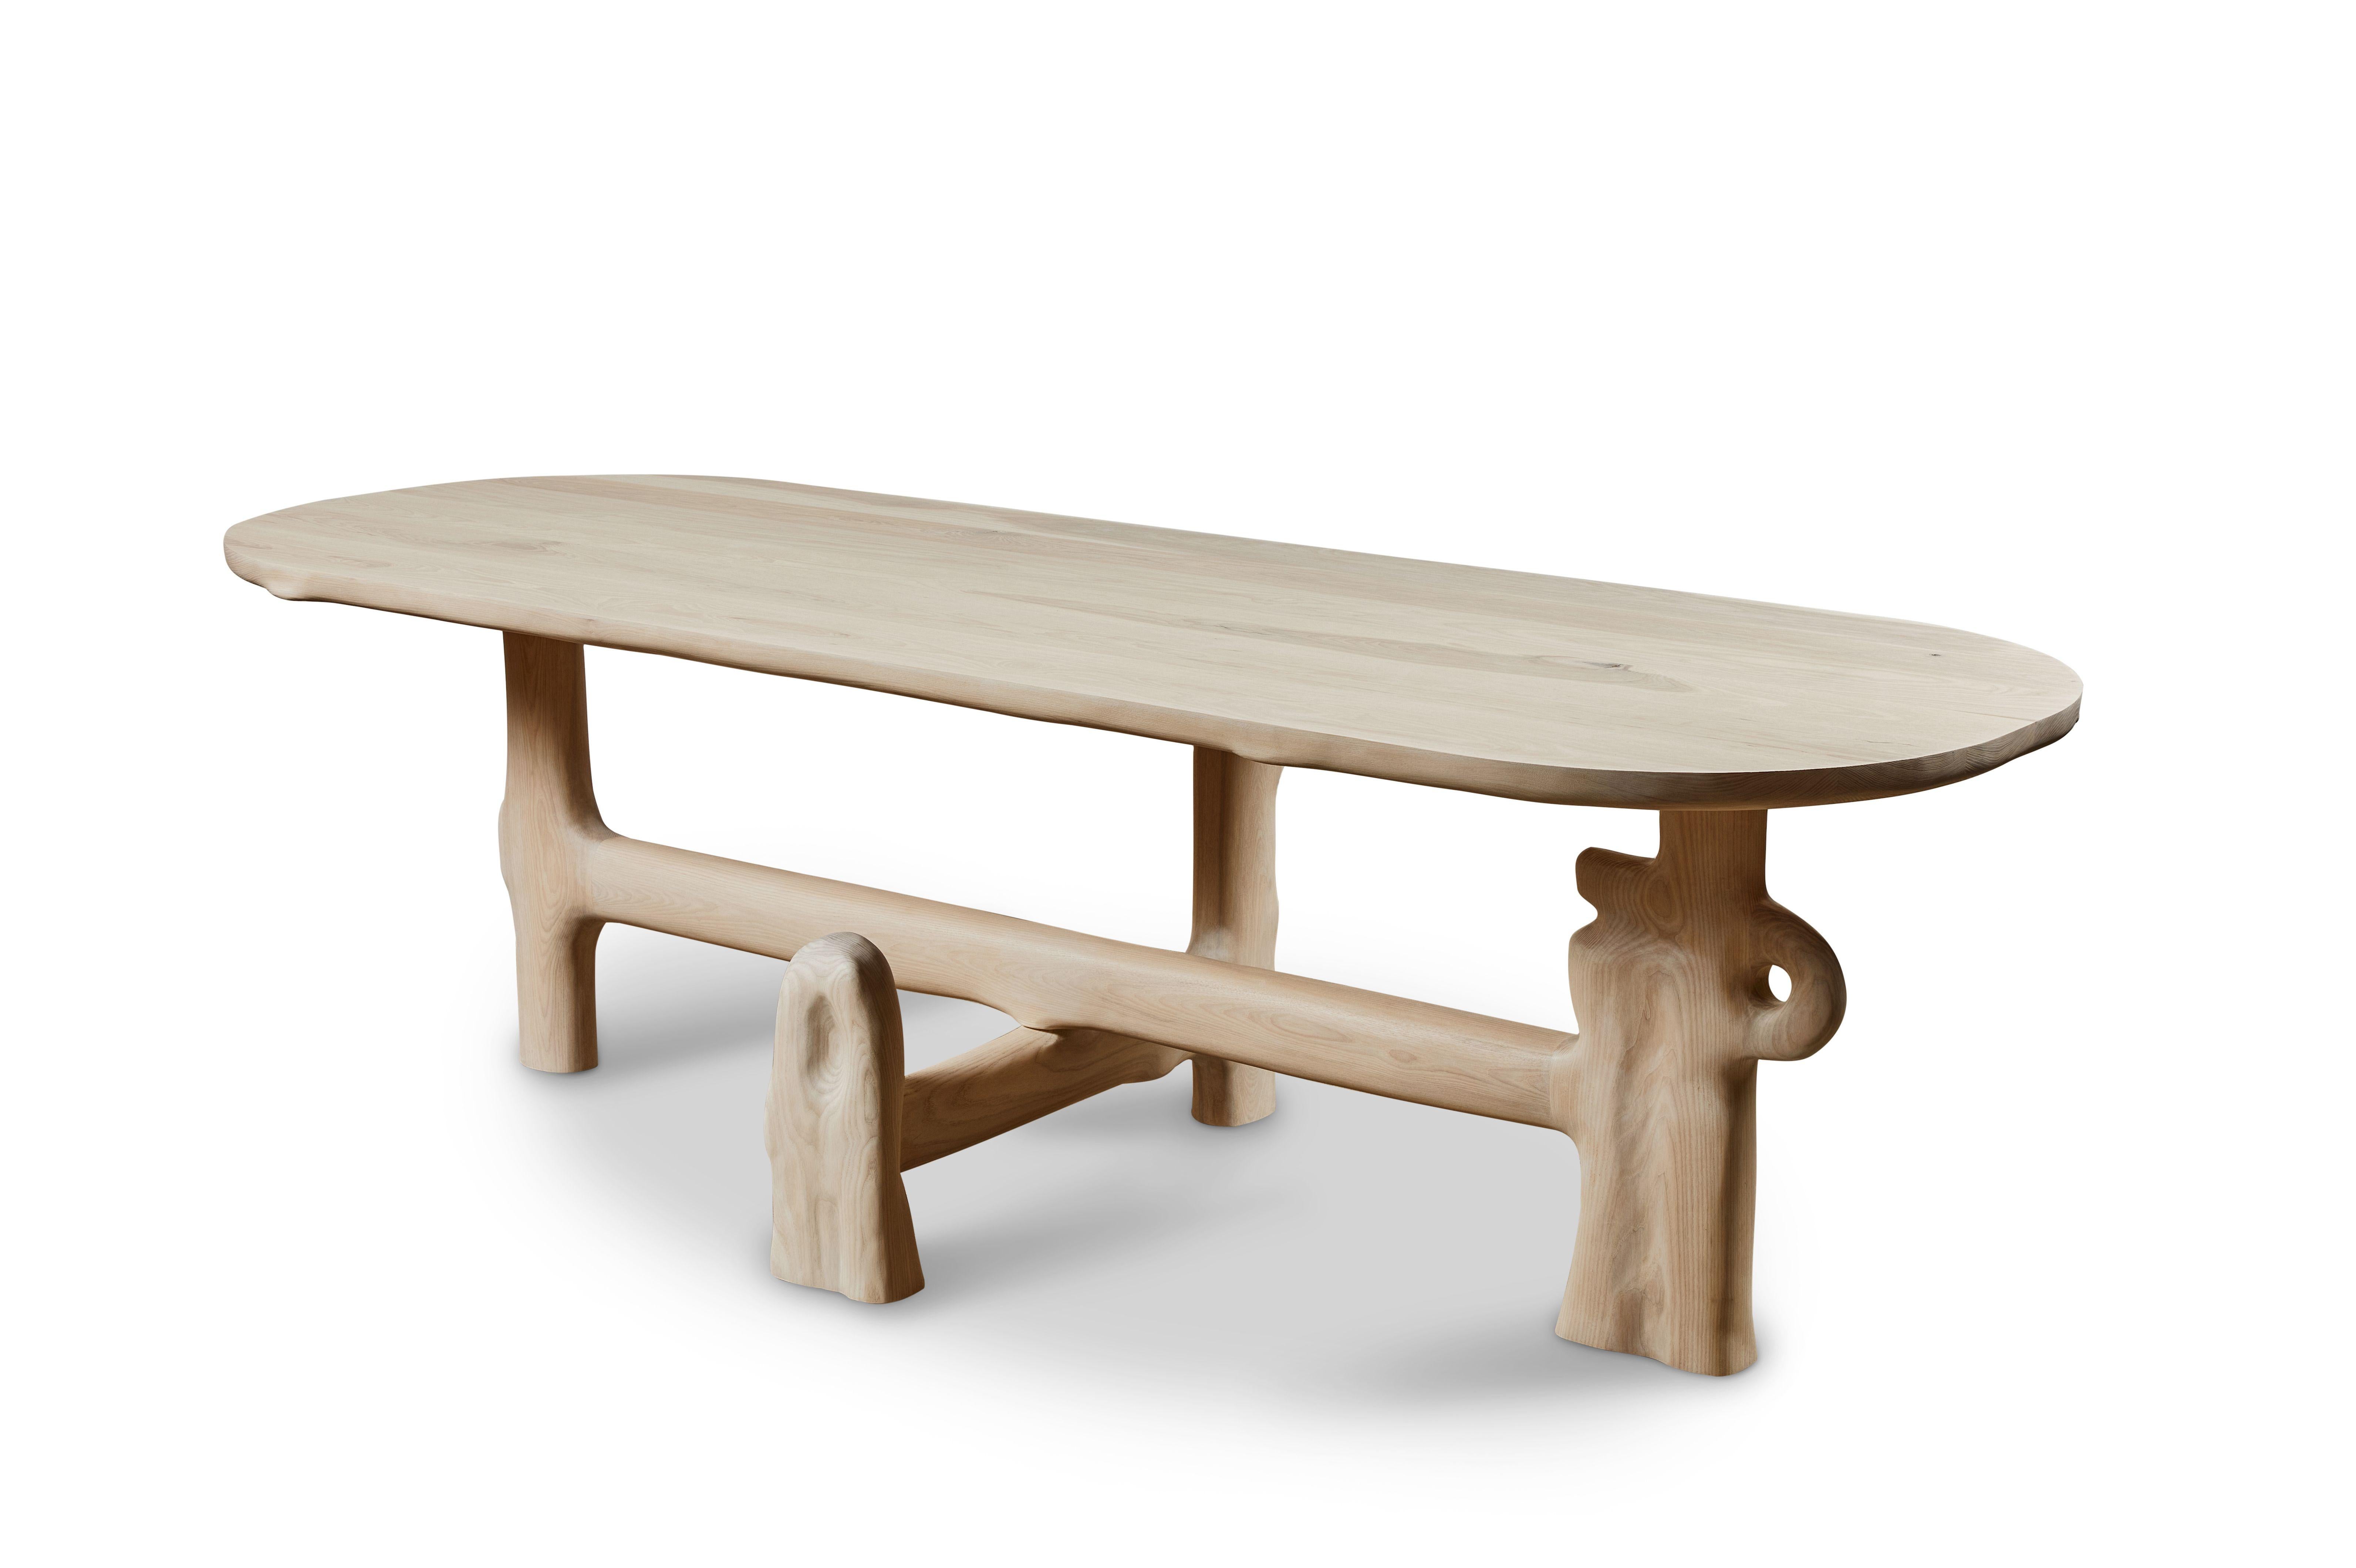 Organic hand carved sculptural dining table in white washed ash. Made in the USA by Casey McCafferty. 

Henge table sculpture series

Pictures shown of this sculptural piece are a depiction what yours could look like. 

This piece is a one of